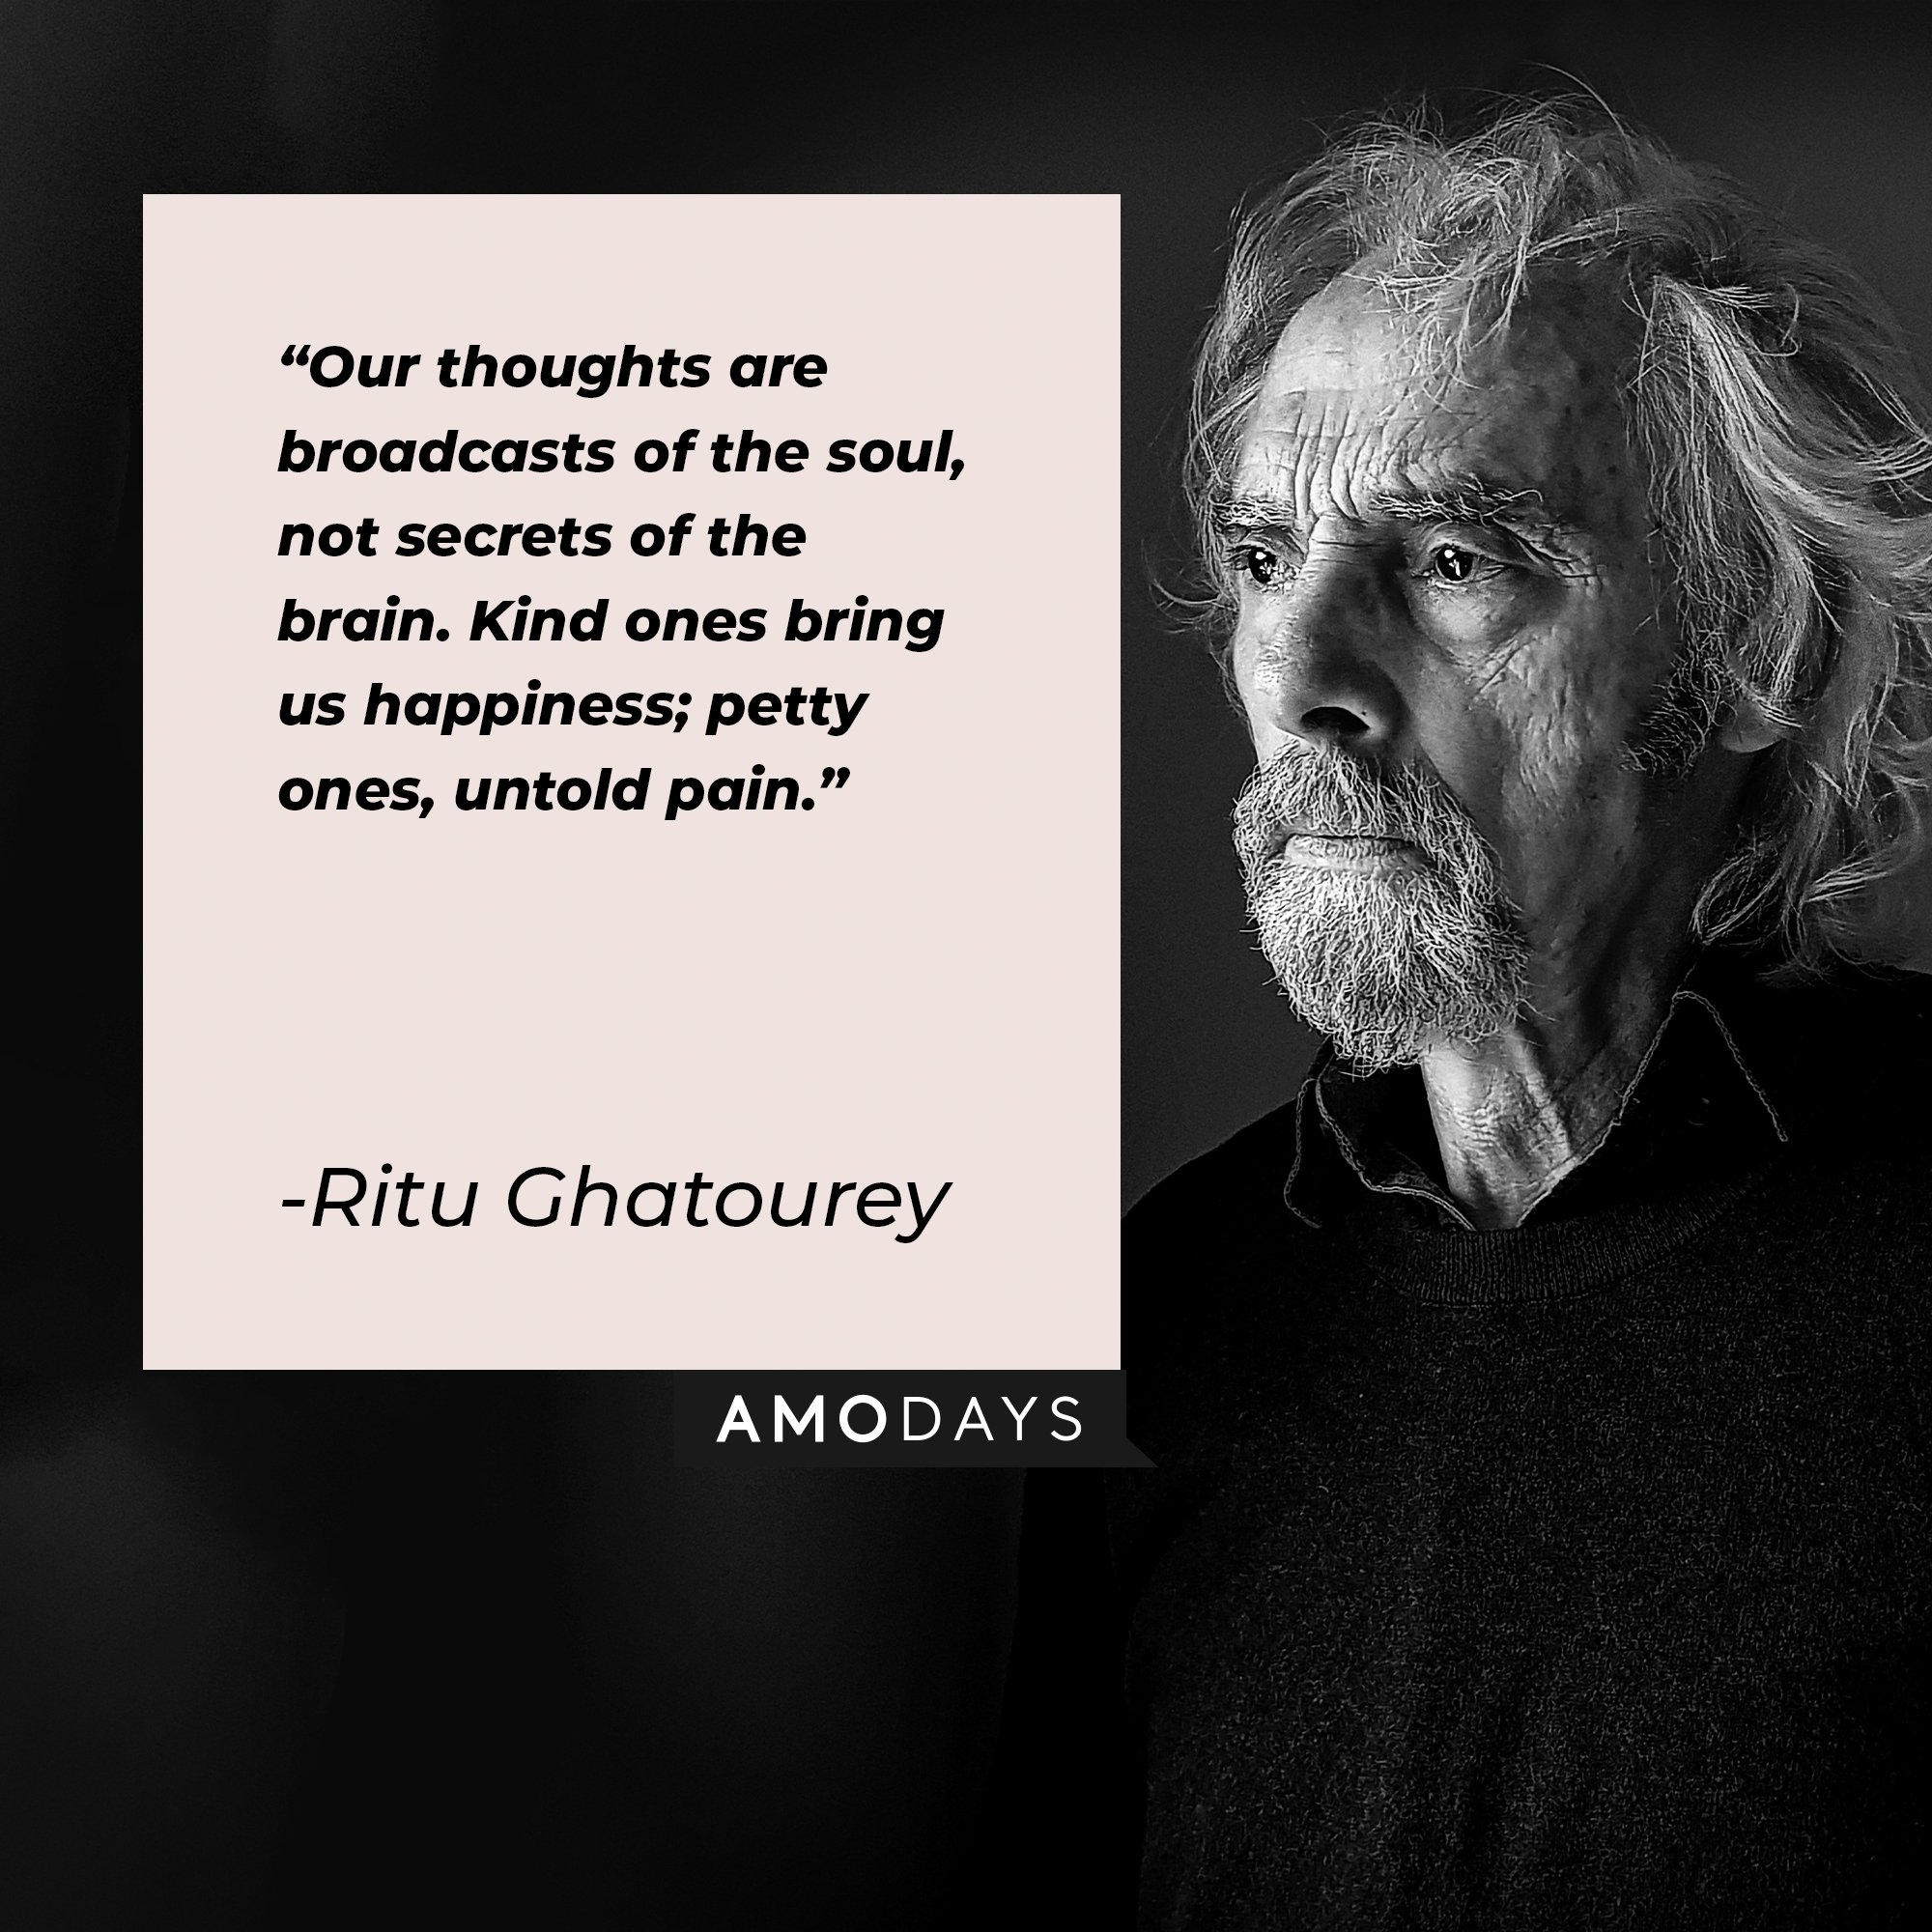 Ritu Ghatourey's quote: "Our thoughts are broadcasts of the soul, not secrets of the brain. Kind ones bring us happiness; petty ones, untold pain." | Image: AmoDays